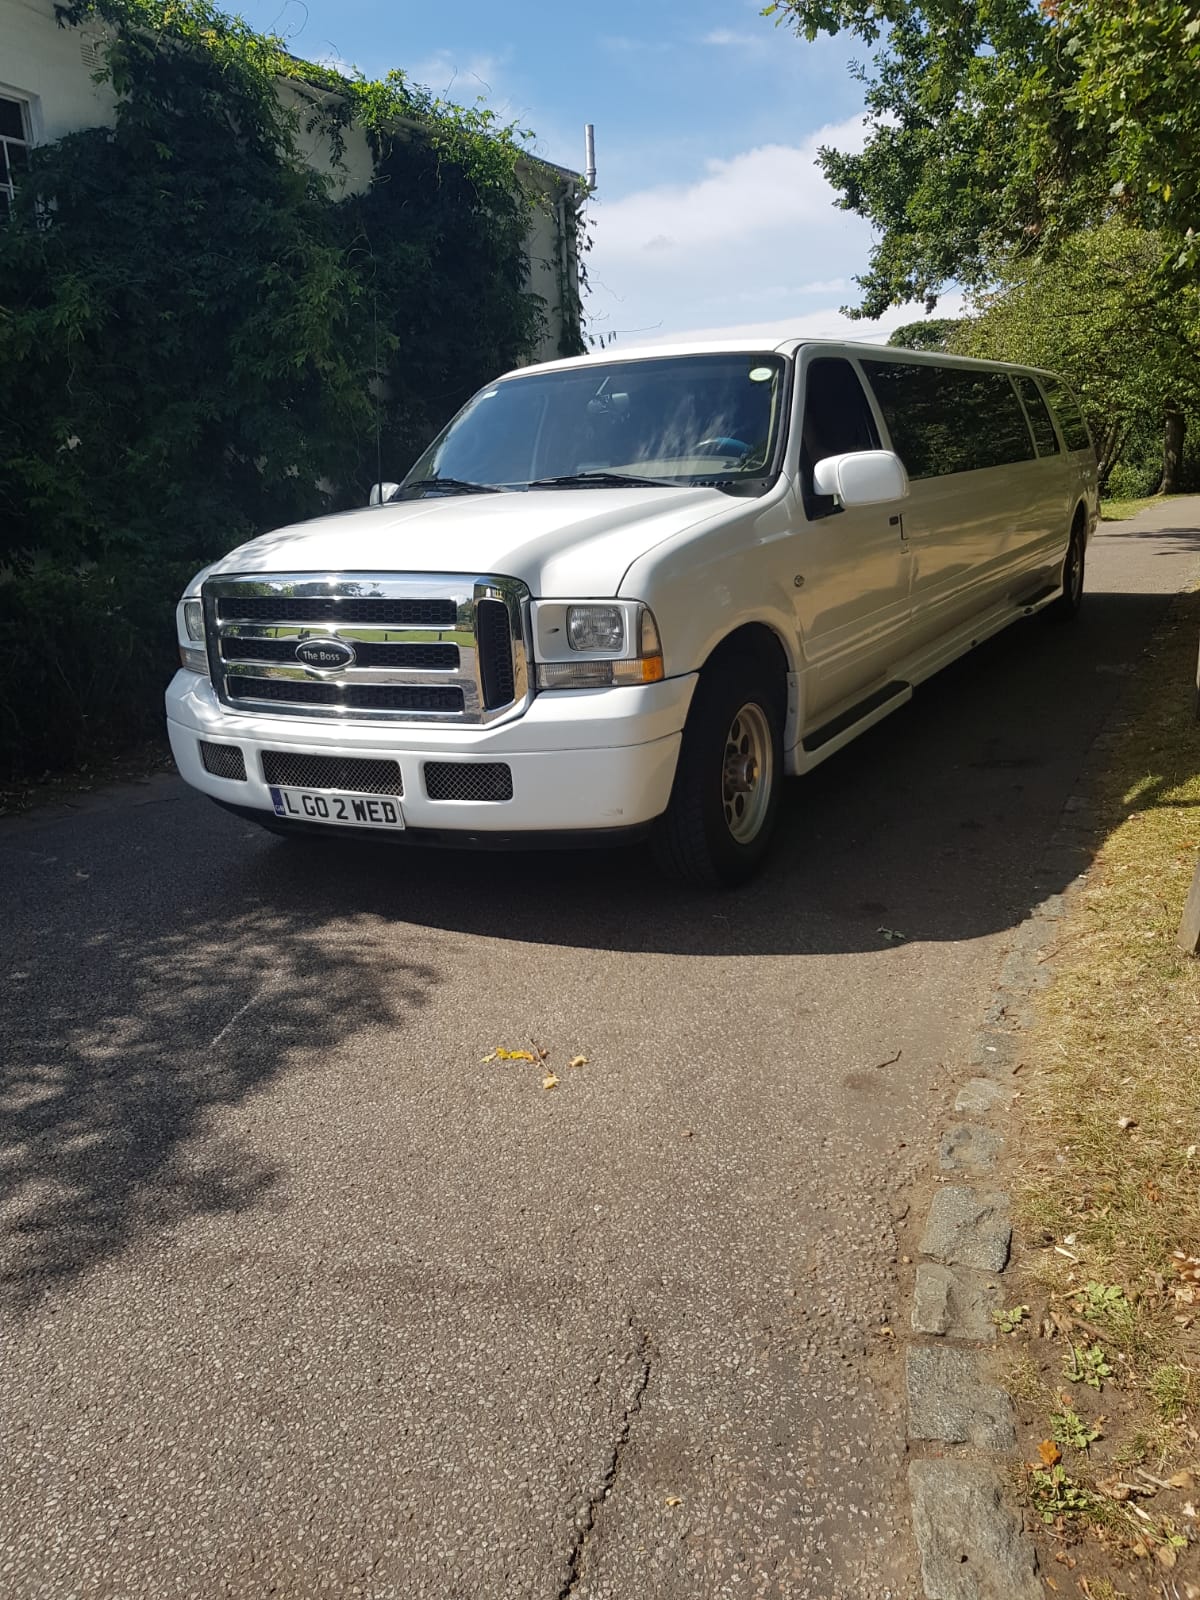 Ford Excursion Limos for Prom Hire